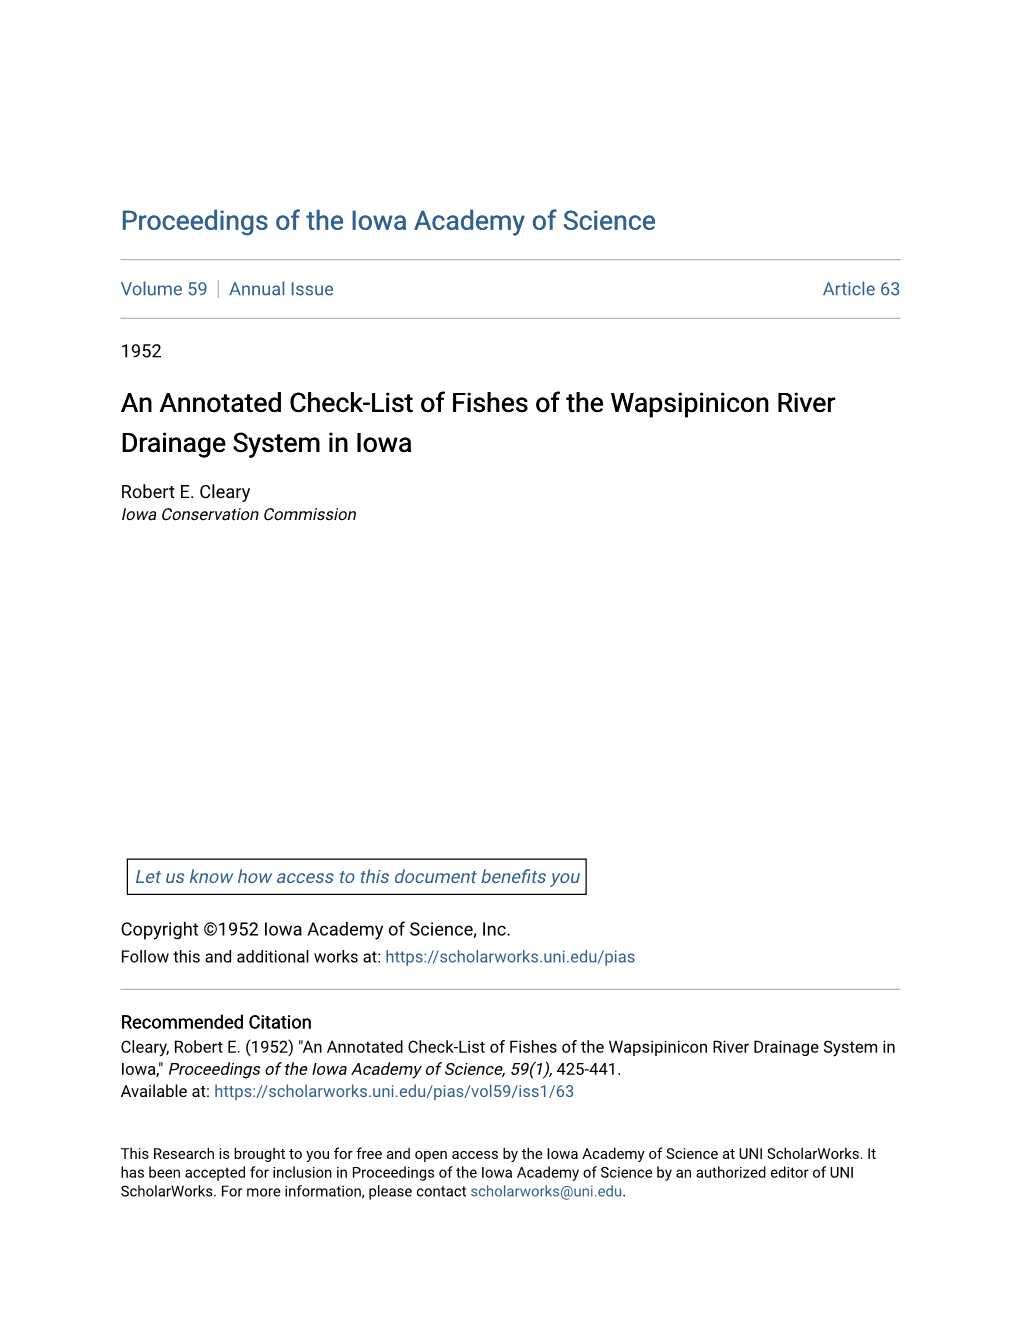 An Annotated Check-List of Fishes of the Wapsipinicon River Drainage System in Iowa